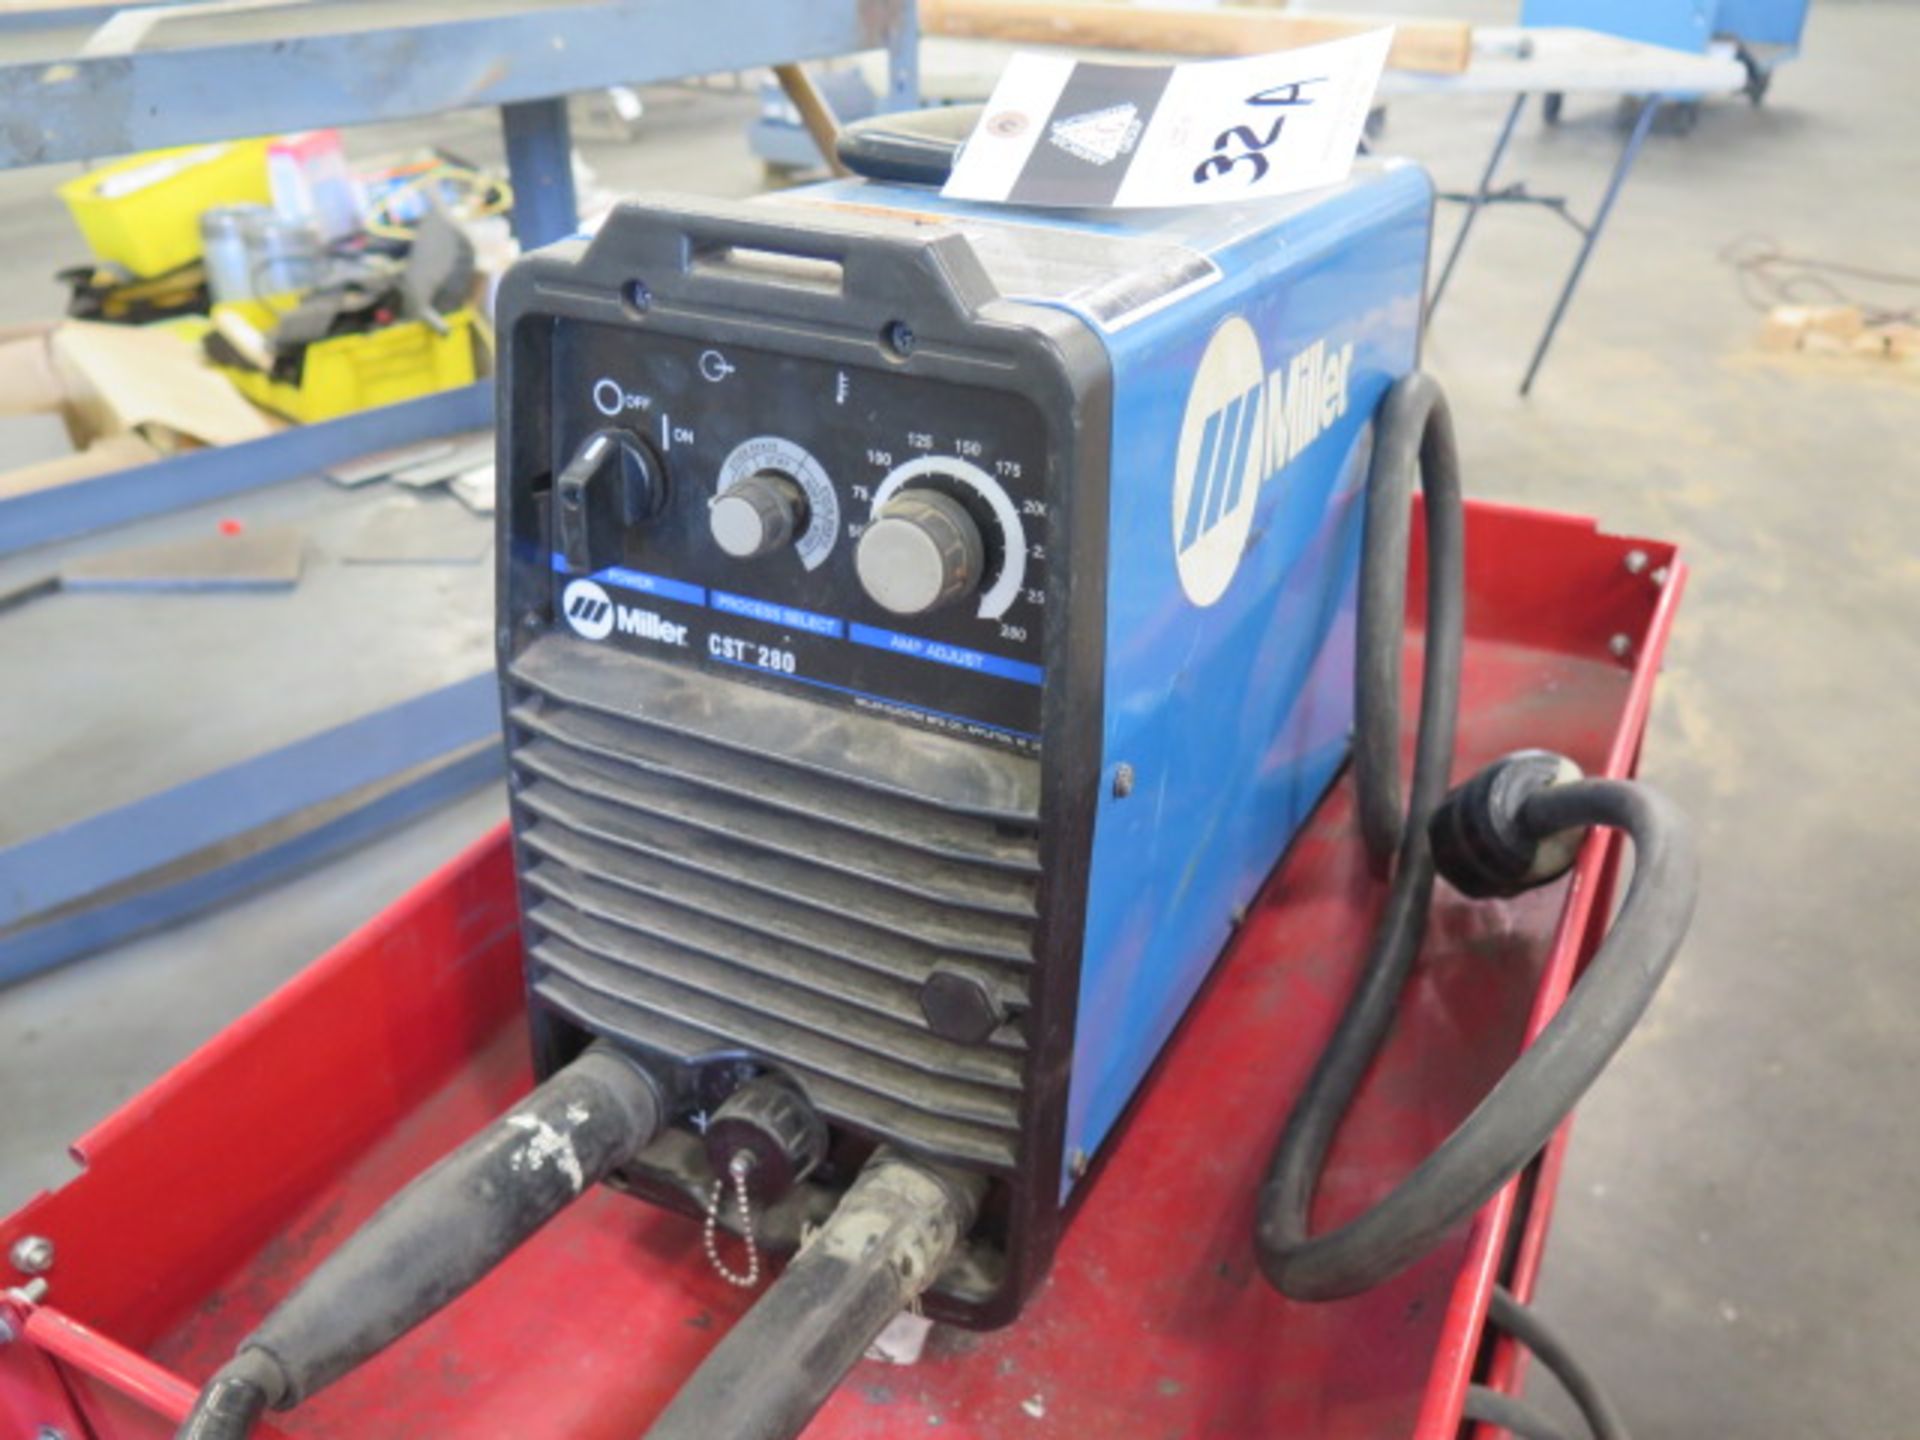 Miller CST280 Arc Welding Power Source s/n MD380346G (SOLD AS-IS - NO WARRANTY) - Image 2 of 5